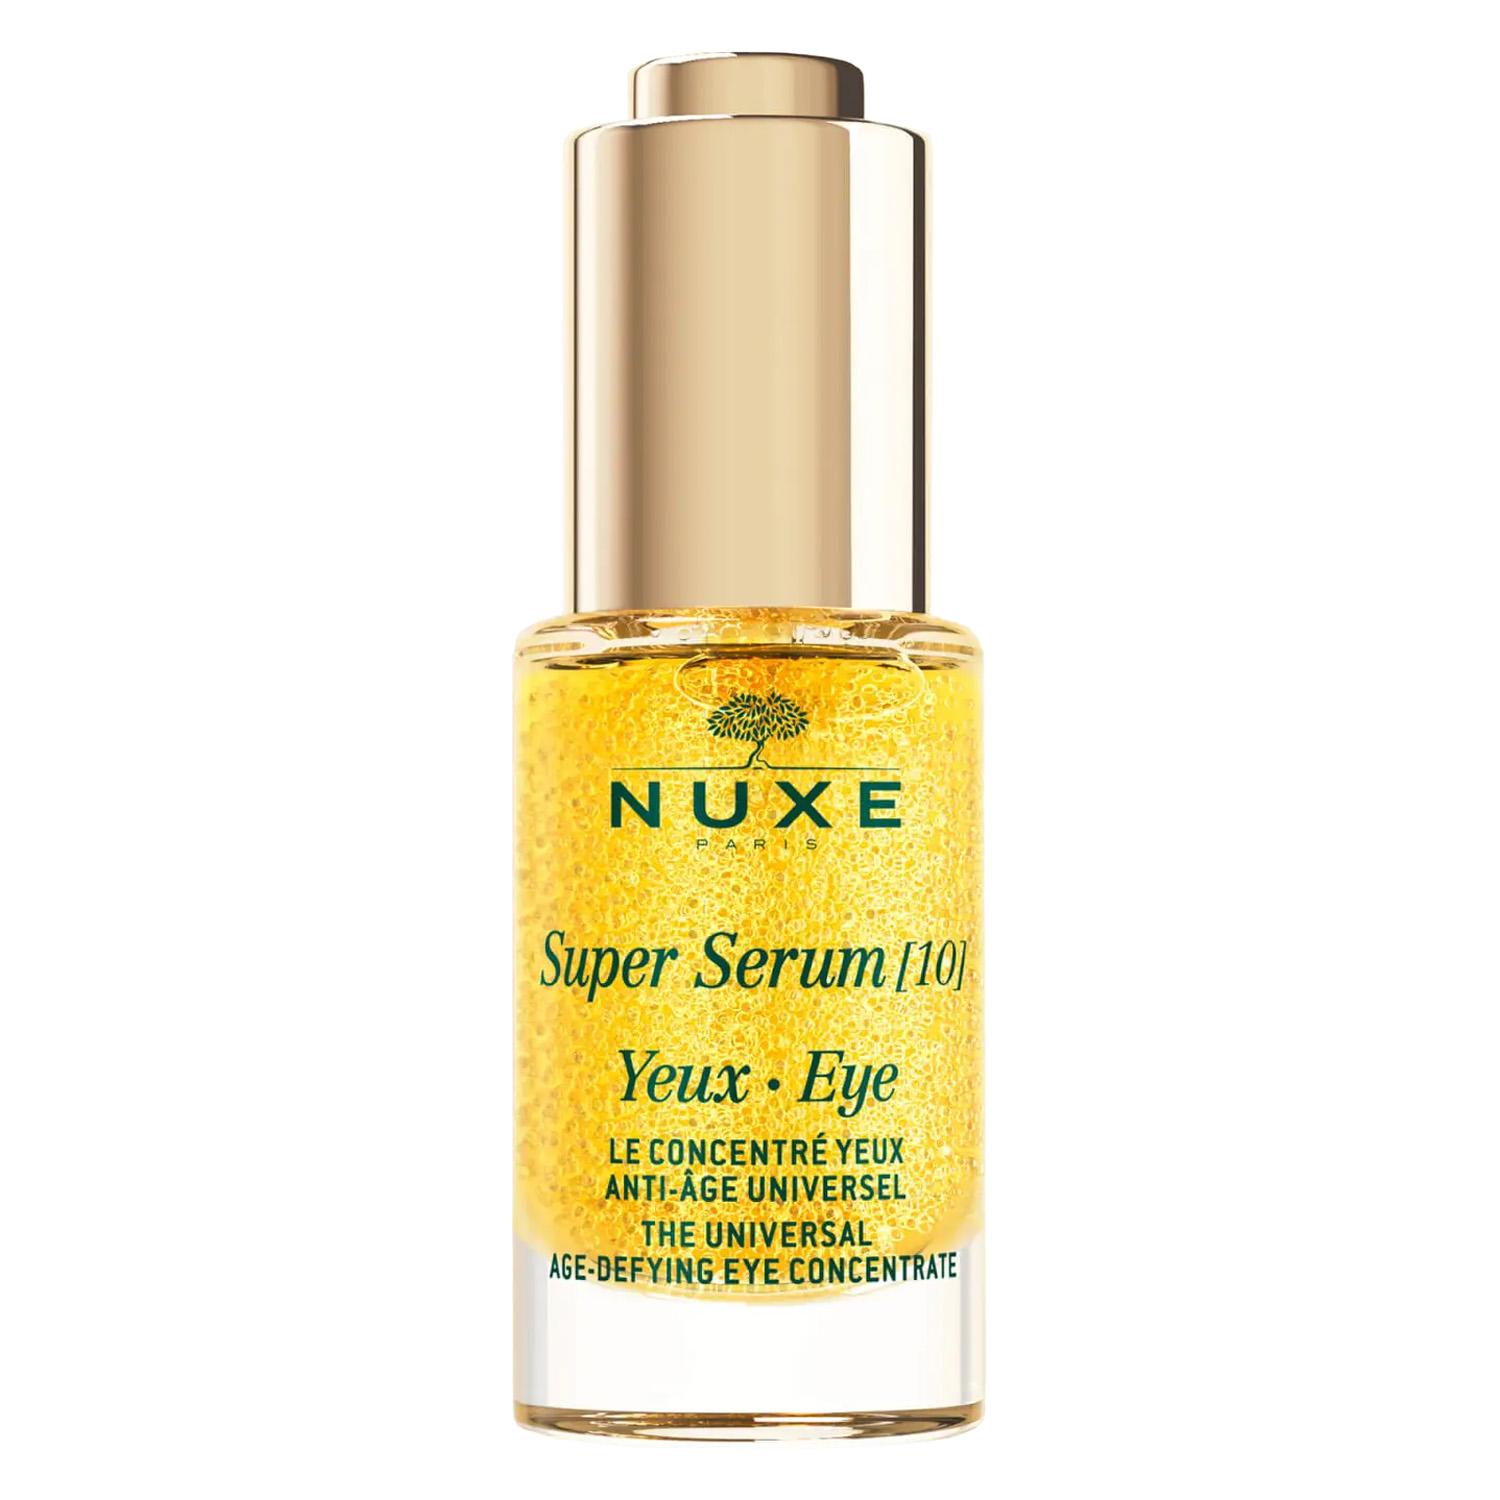 Nuxe Face - Super Serum [10] Eye Concentrate